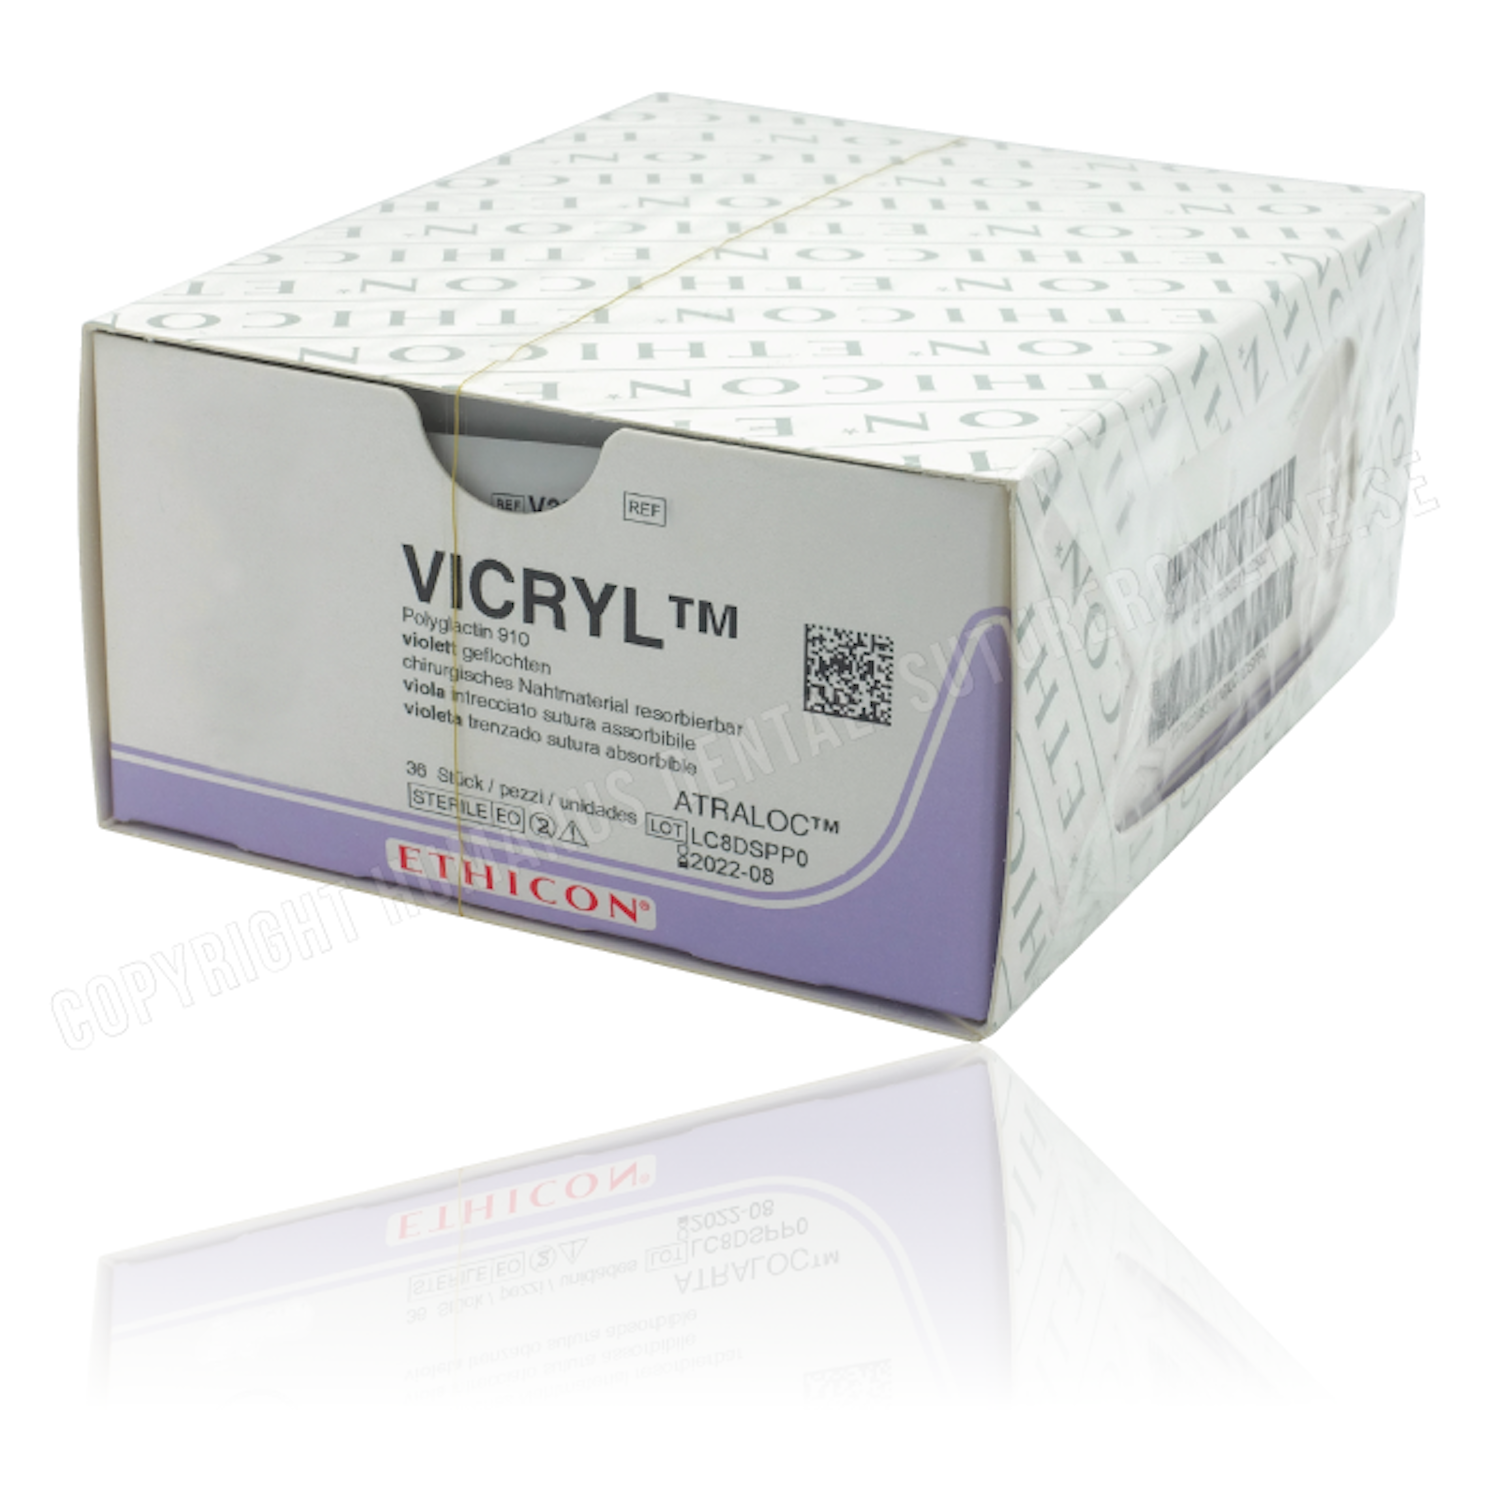 Ethicon Vicryl Rapide Suture | Absorbable | Violet | Size: 7-0 | Length: 30cm | Needle: TG-140-8 | Pack of 12 (1)